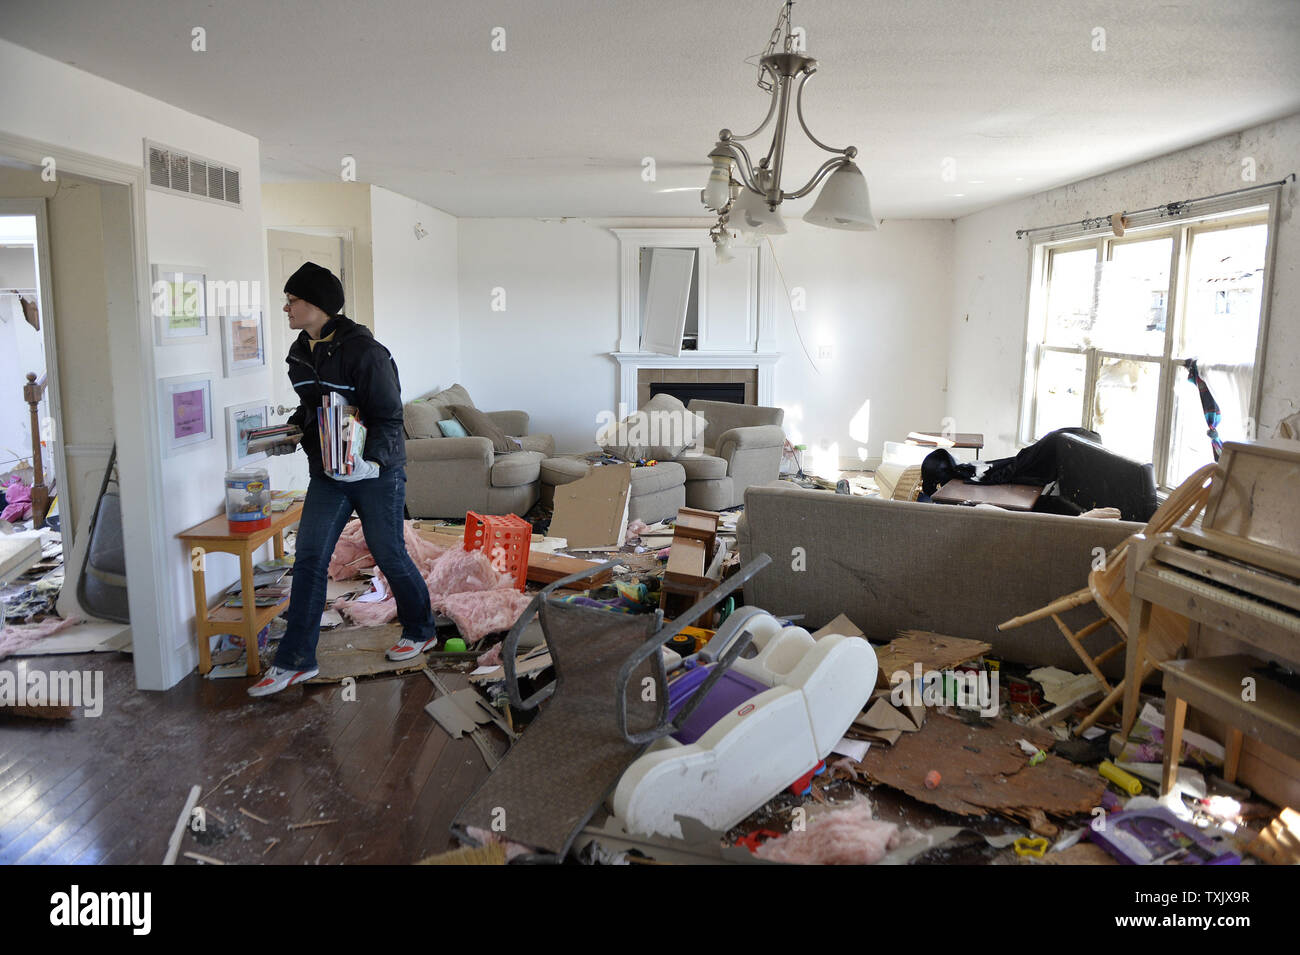 Helen Potts sorts through her belongings in her living room in Washington, Illinois on November 18, 2013. Six people died and hundreds of homes were destroyed in Illinois as 81 tornadoes were sighted on November 17 throughout 12 midwest states including the EF4 tornado that struck Washington, Illinois.     UPI/Brian Kersey.     UPI/Brian Kersey Stock Photo